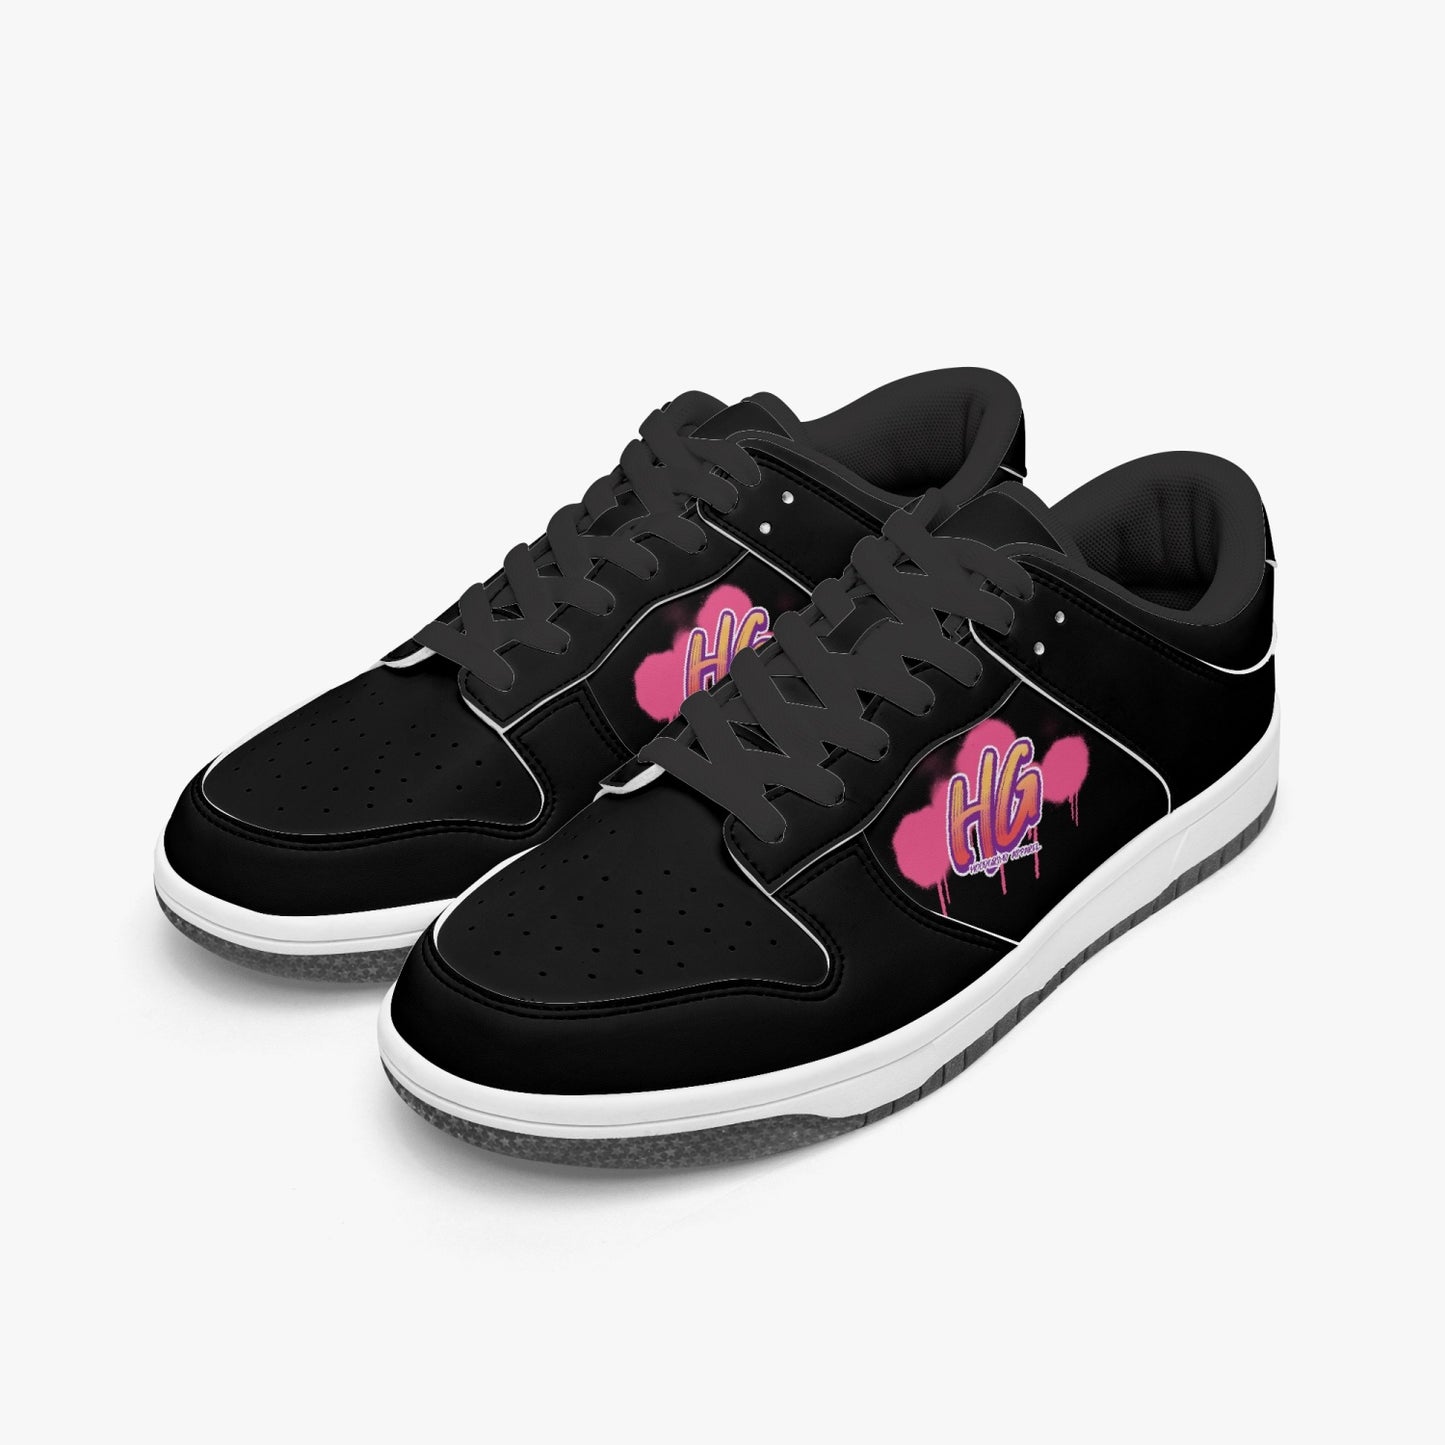 HOODGRIND Dunk Stylish Low-Top Leather Sneakers